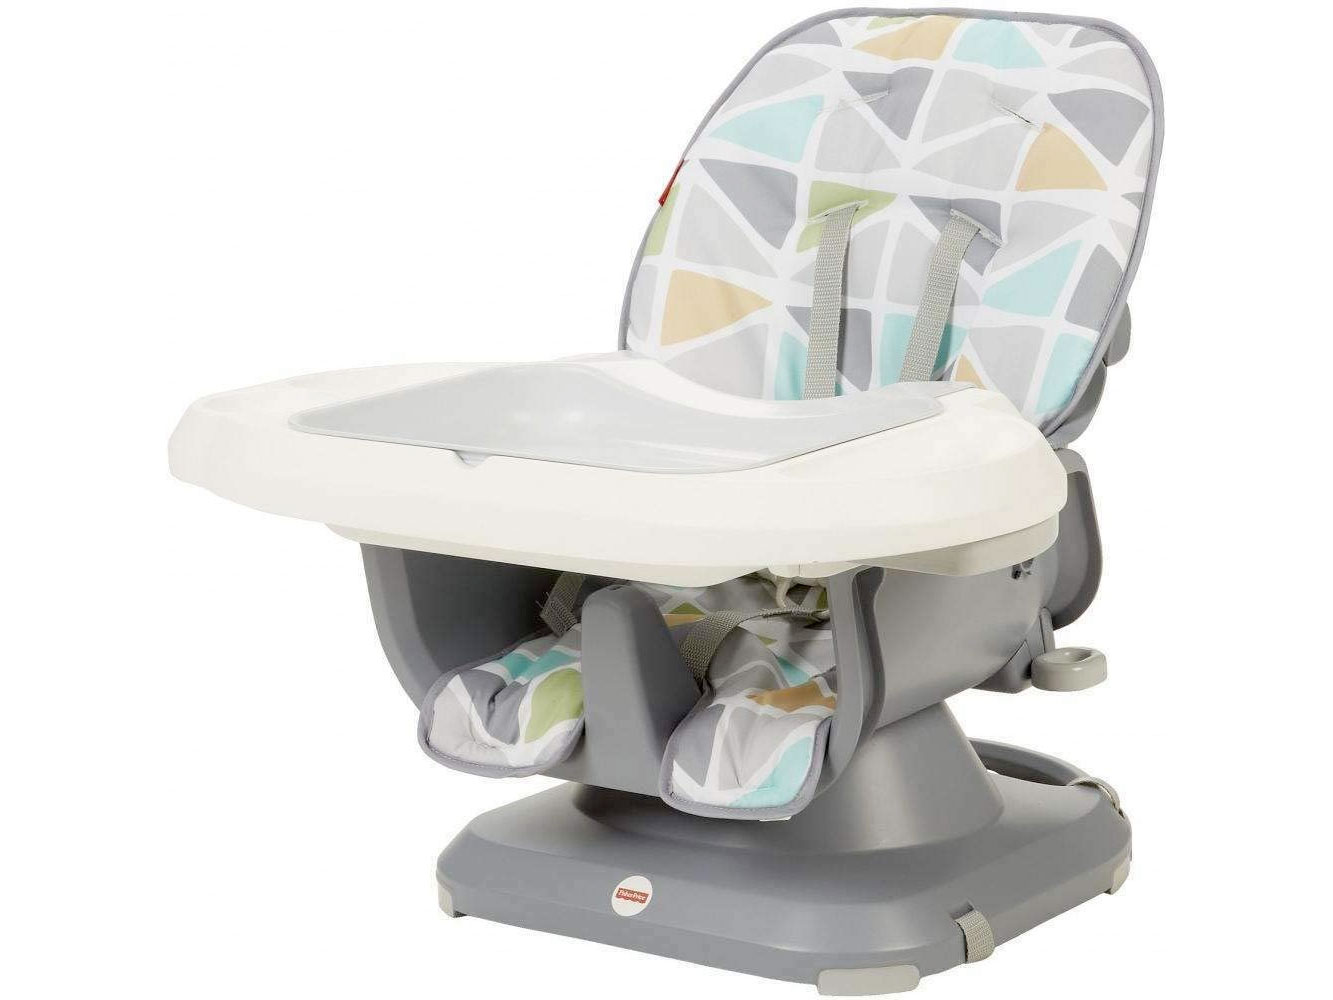 Amazon：Fisher-Price SpaceSaver High Chair只卖$40